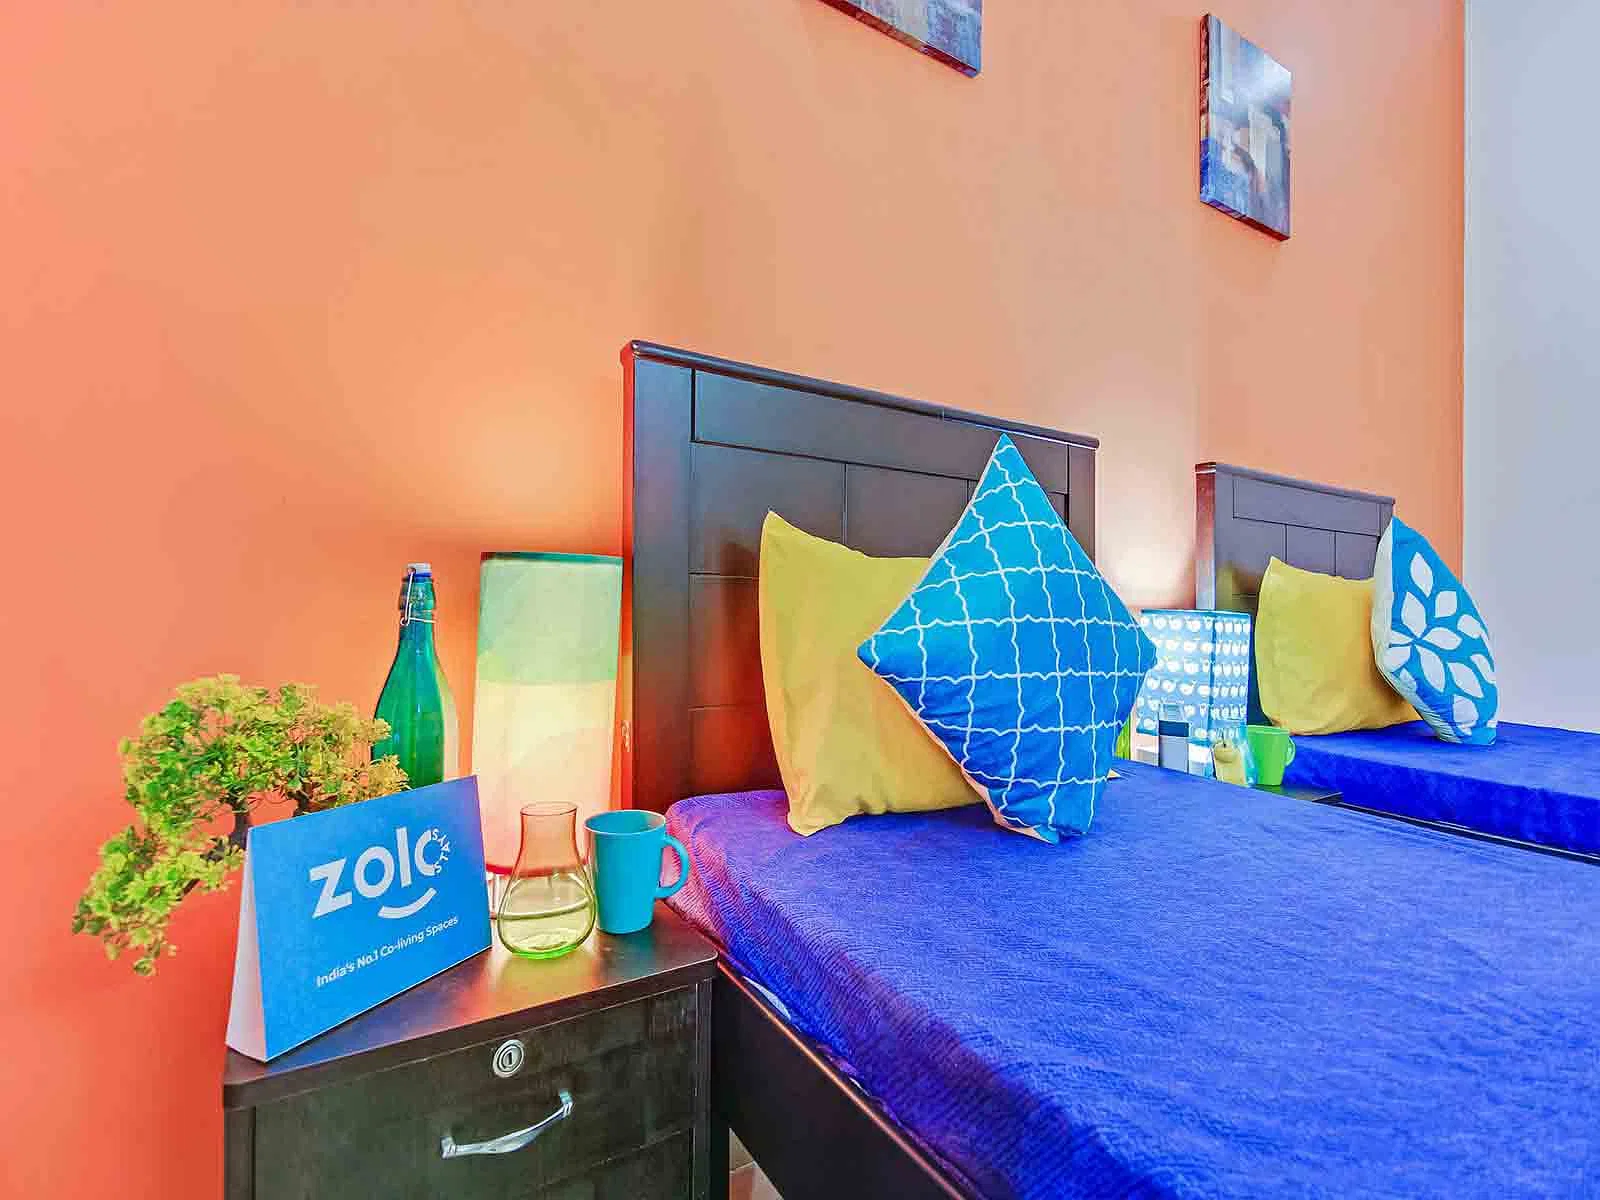 safe and affordable hostels for couple students with 24/7 security and CCTV surveillance-Zolo Espace